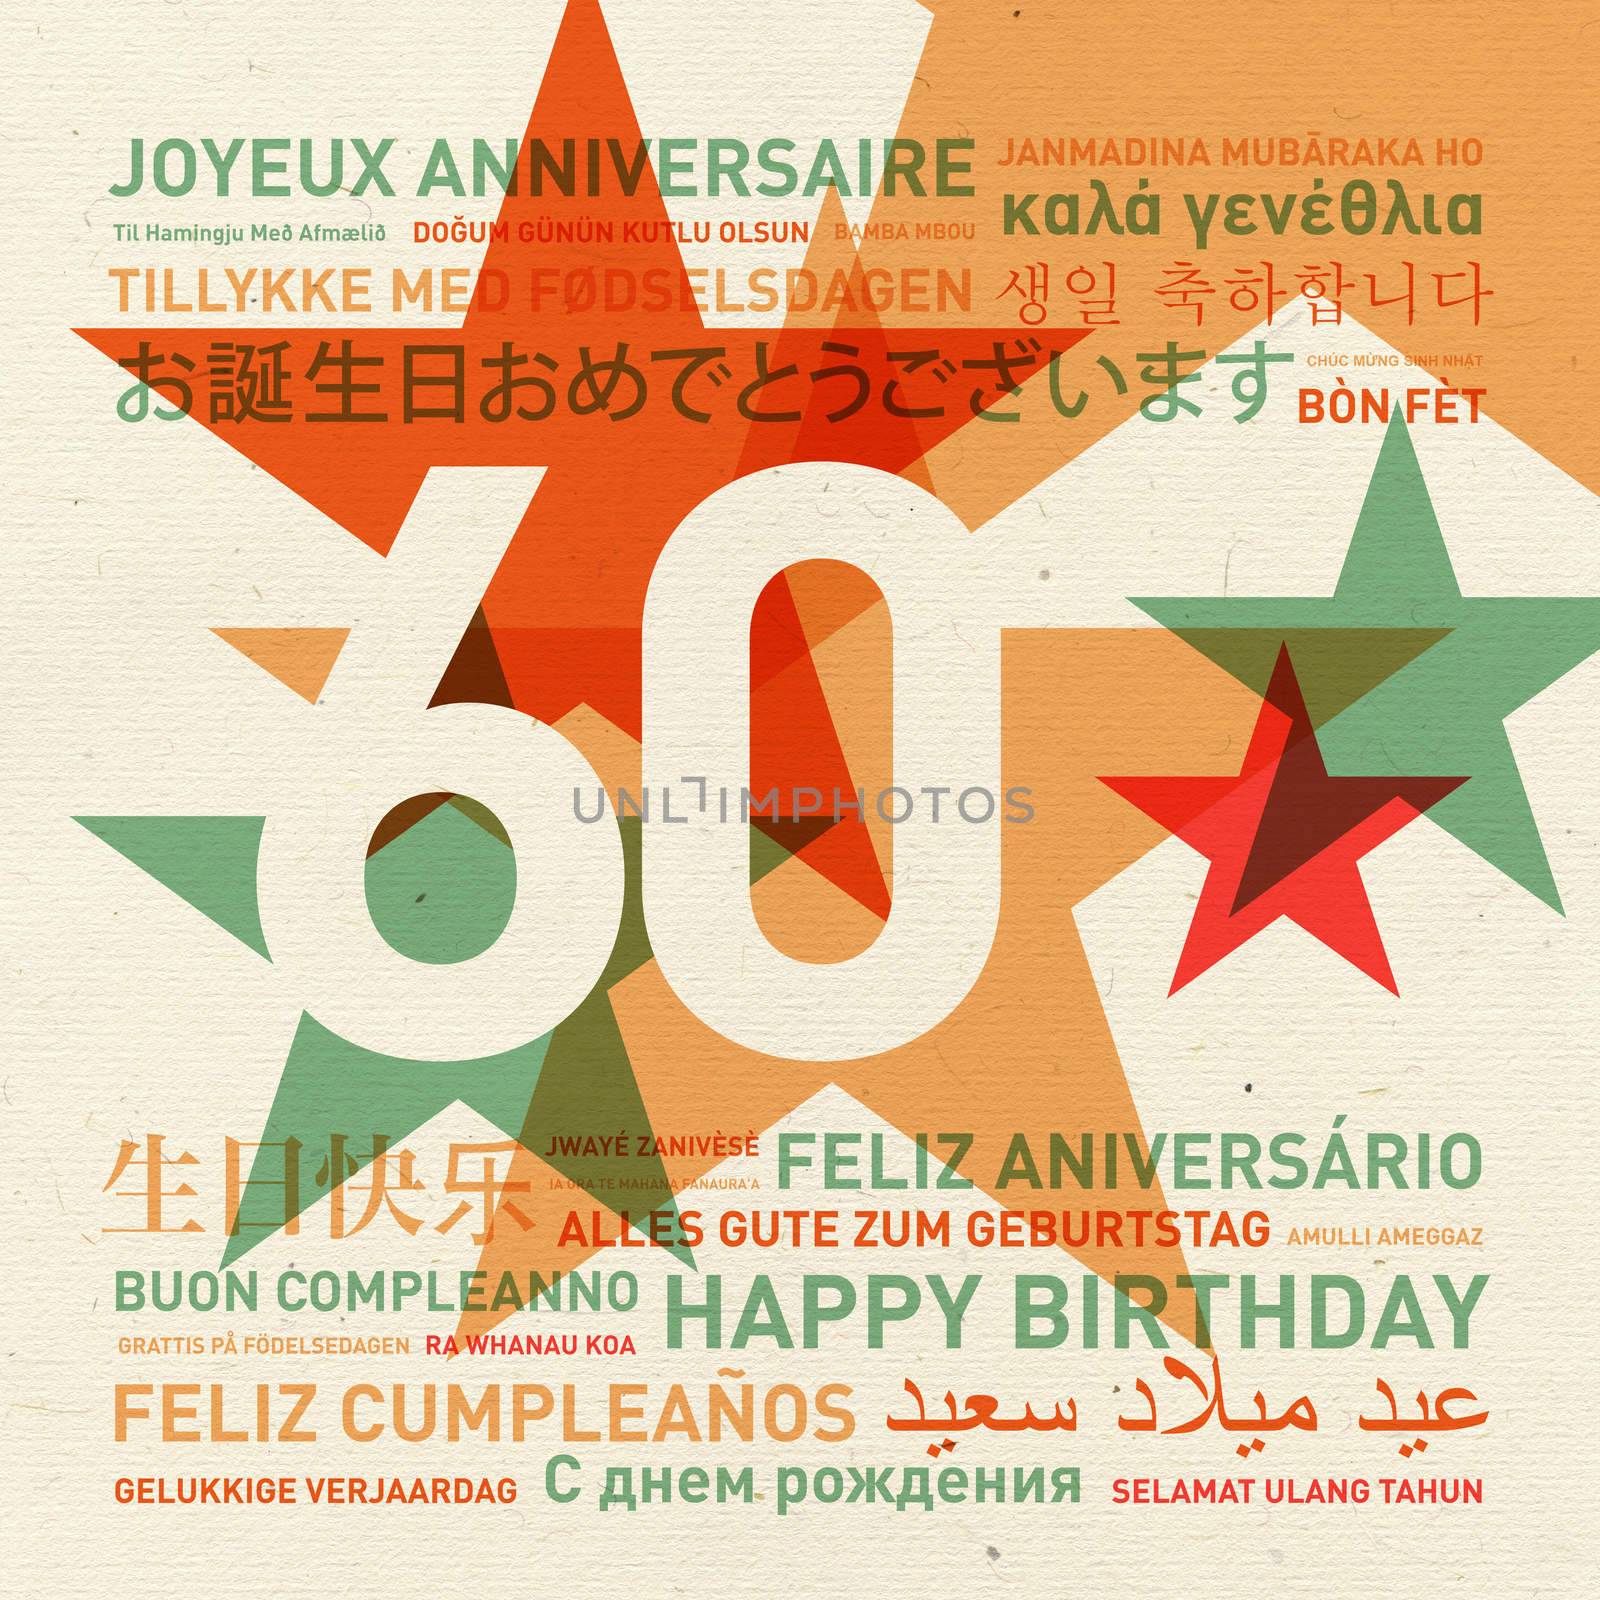 60th anniversary happy birthday from the world. Different languages celebration card